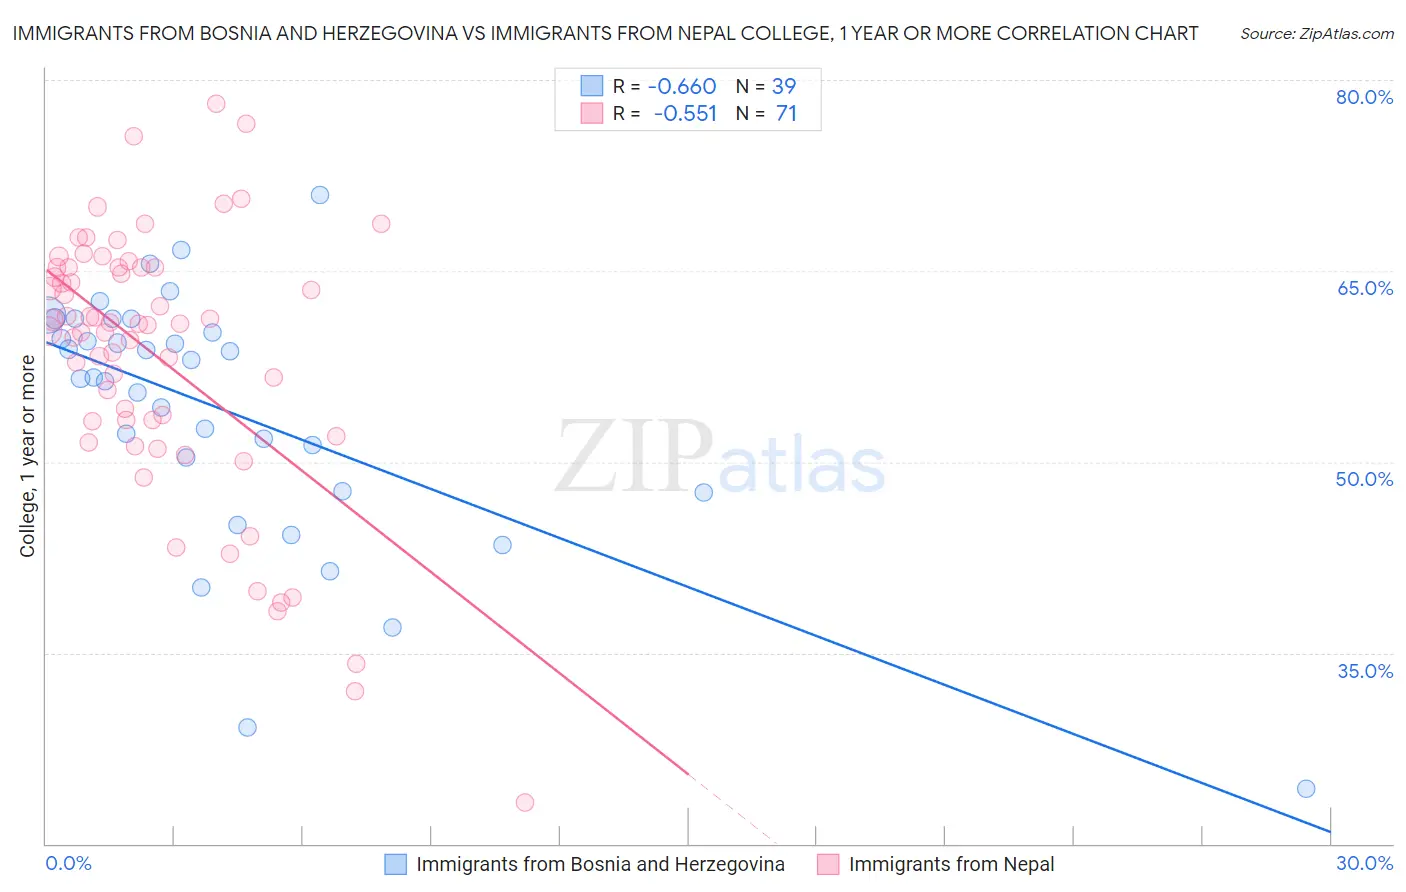 Immigrants from Bosnia and Herzegovina vs Immigrants from Nepal College, 1 year or more